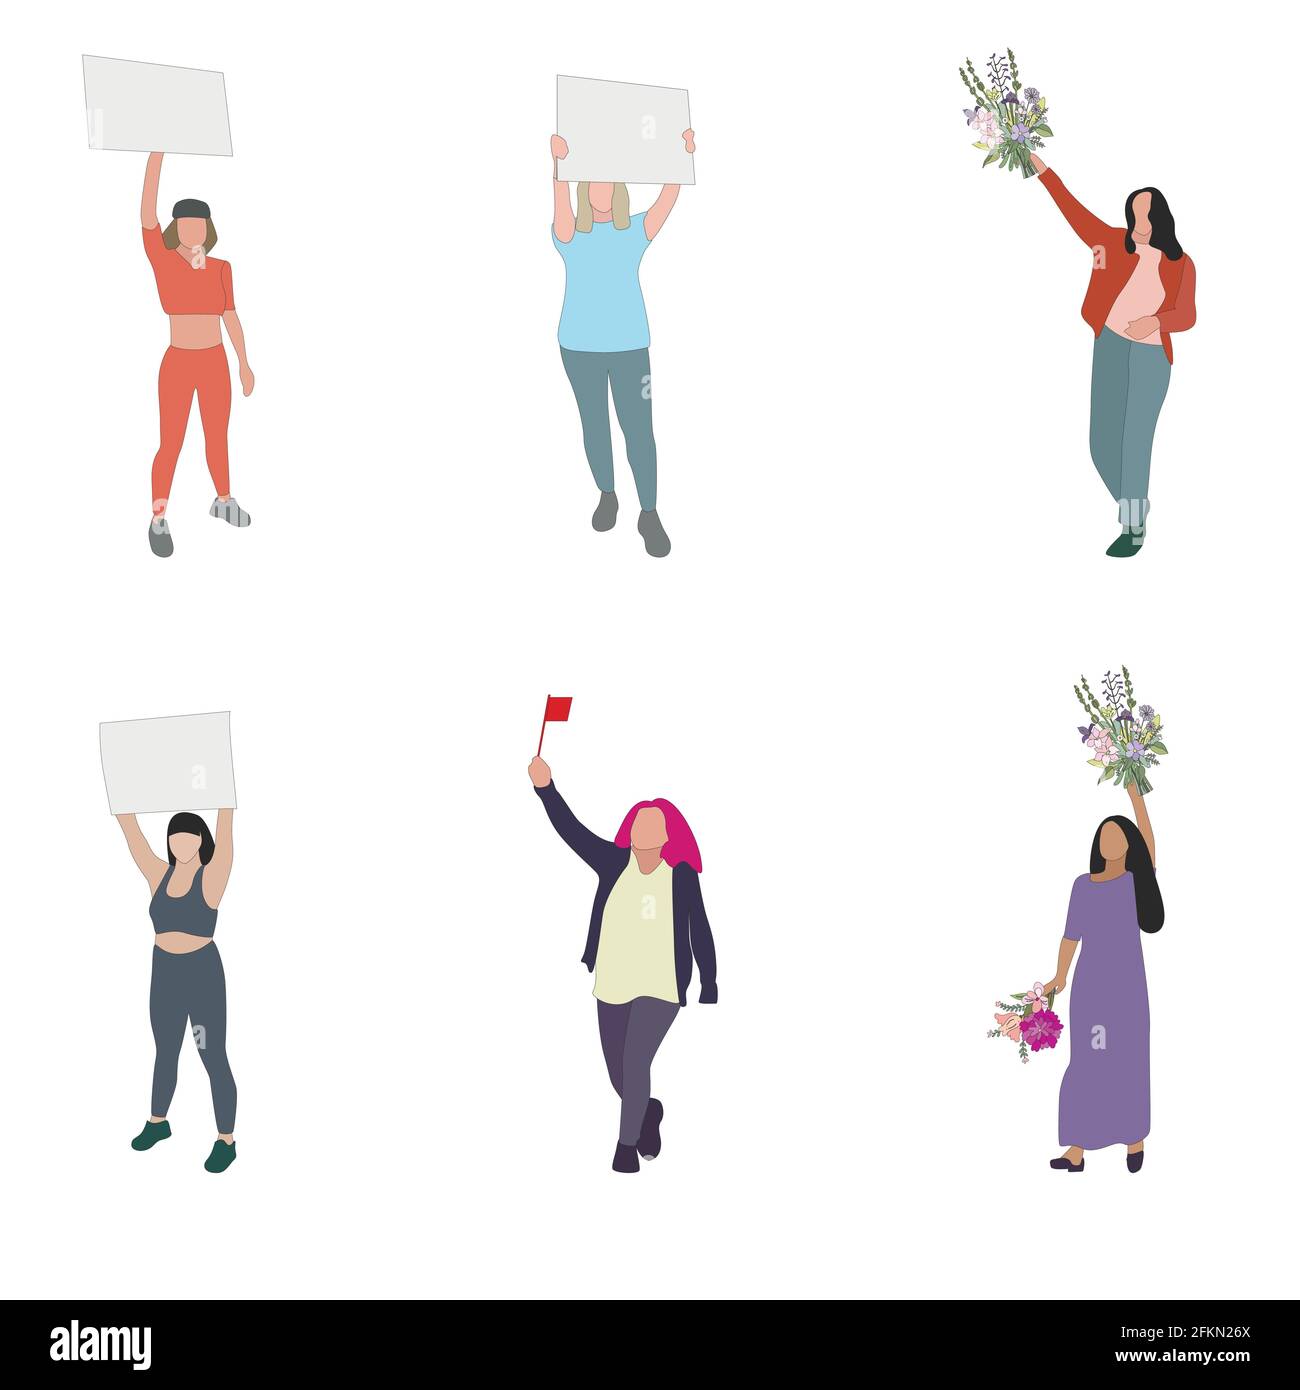 Women protester set isolated, woman and girl with placard. Vector women political rights, collection of protest people, design politics activism illus Stock Vector